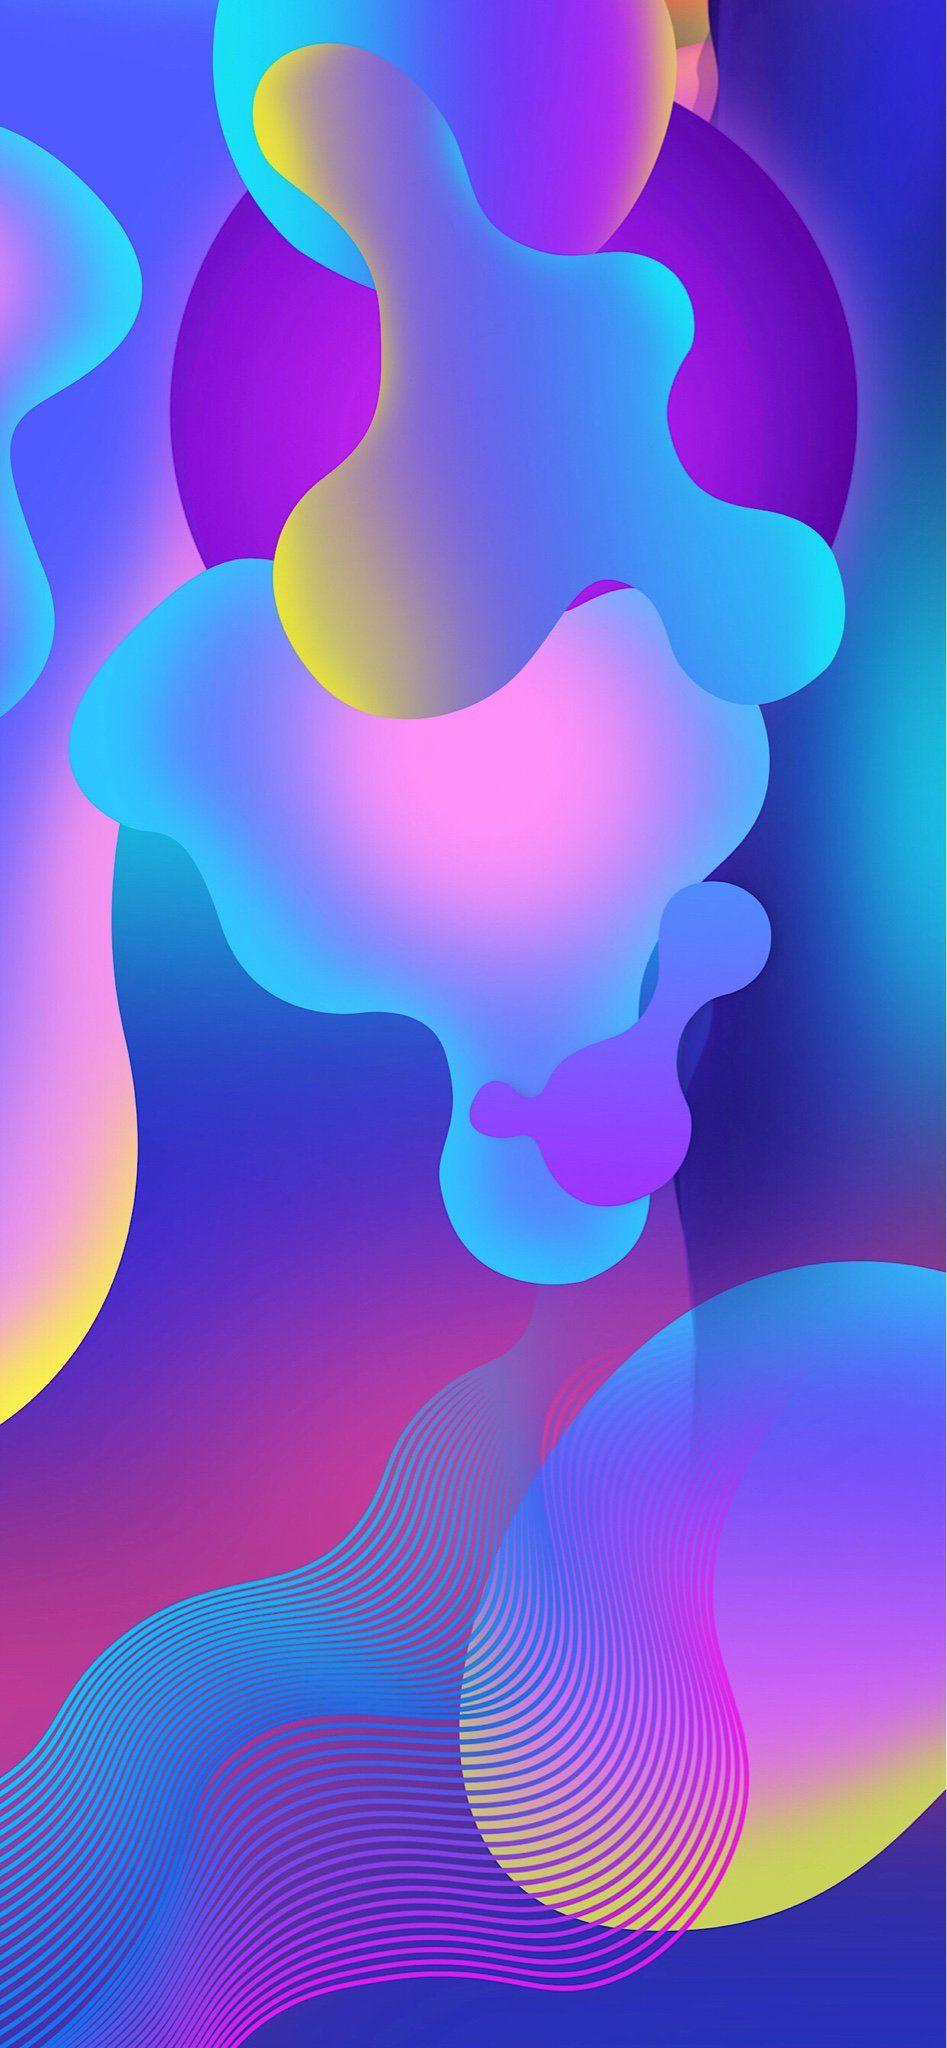 The iPhone XS Max Wallpapers Thread